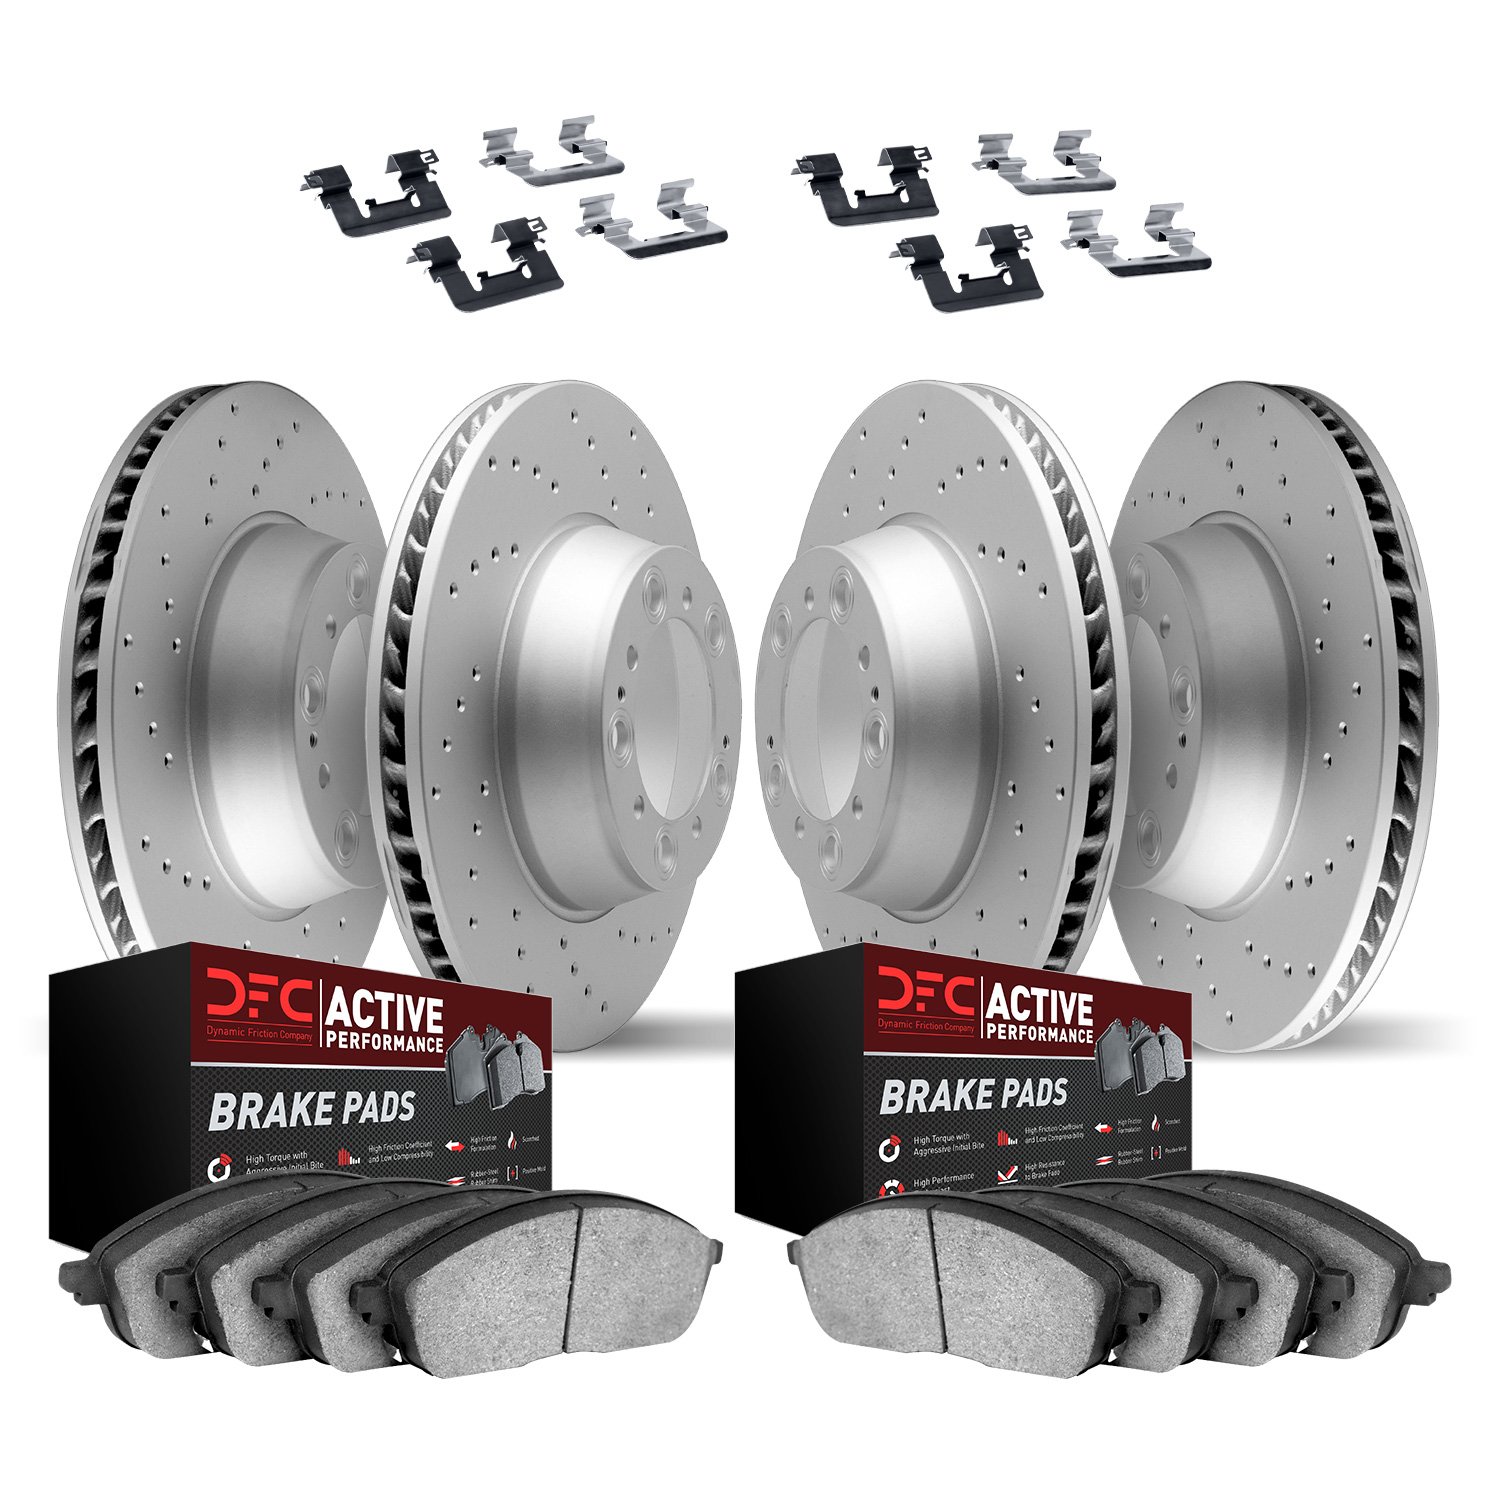 2714-31102 Geoperformance Drilled Brake Rotors with Active Performance Pads Kit & Hardware, 2008-2013 BMW, Position: Front and R